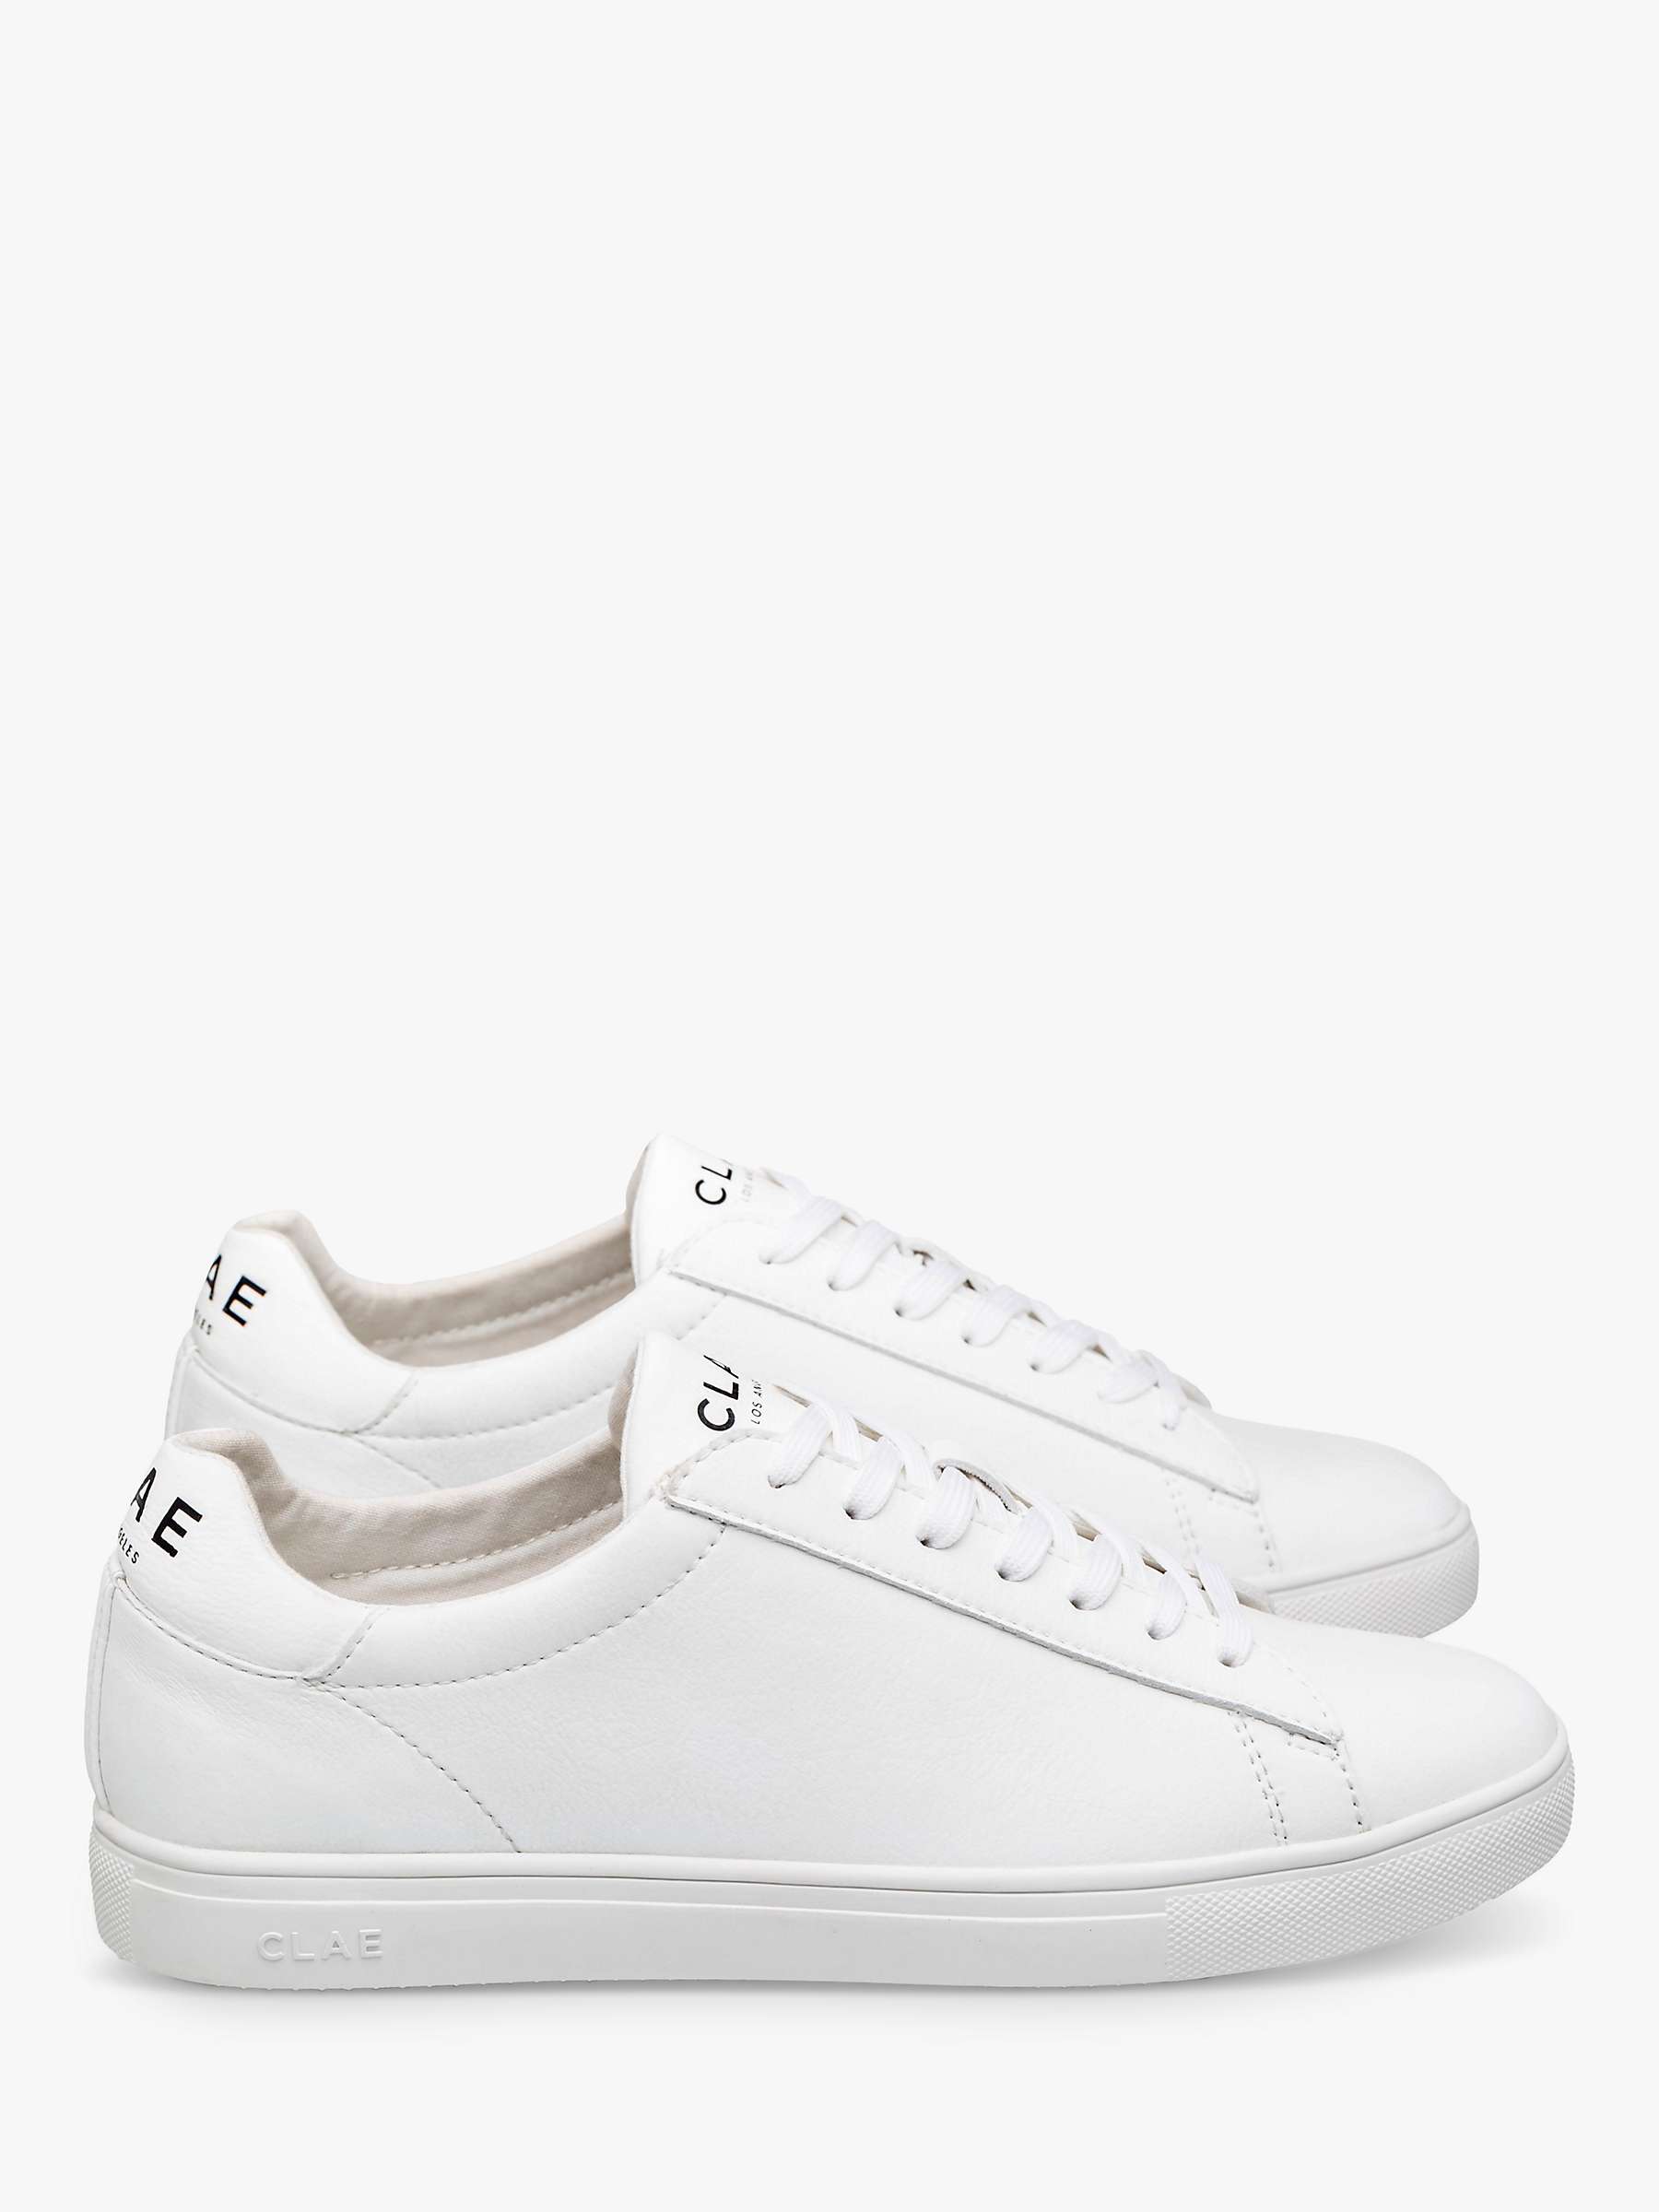 CLAE Bradley Essentials Leather Trainers, White at John Lewis & Partners